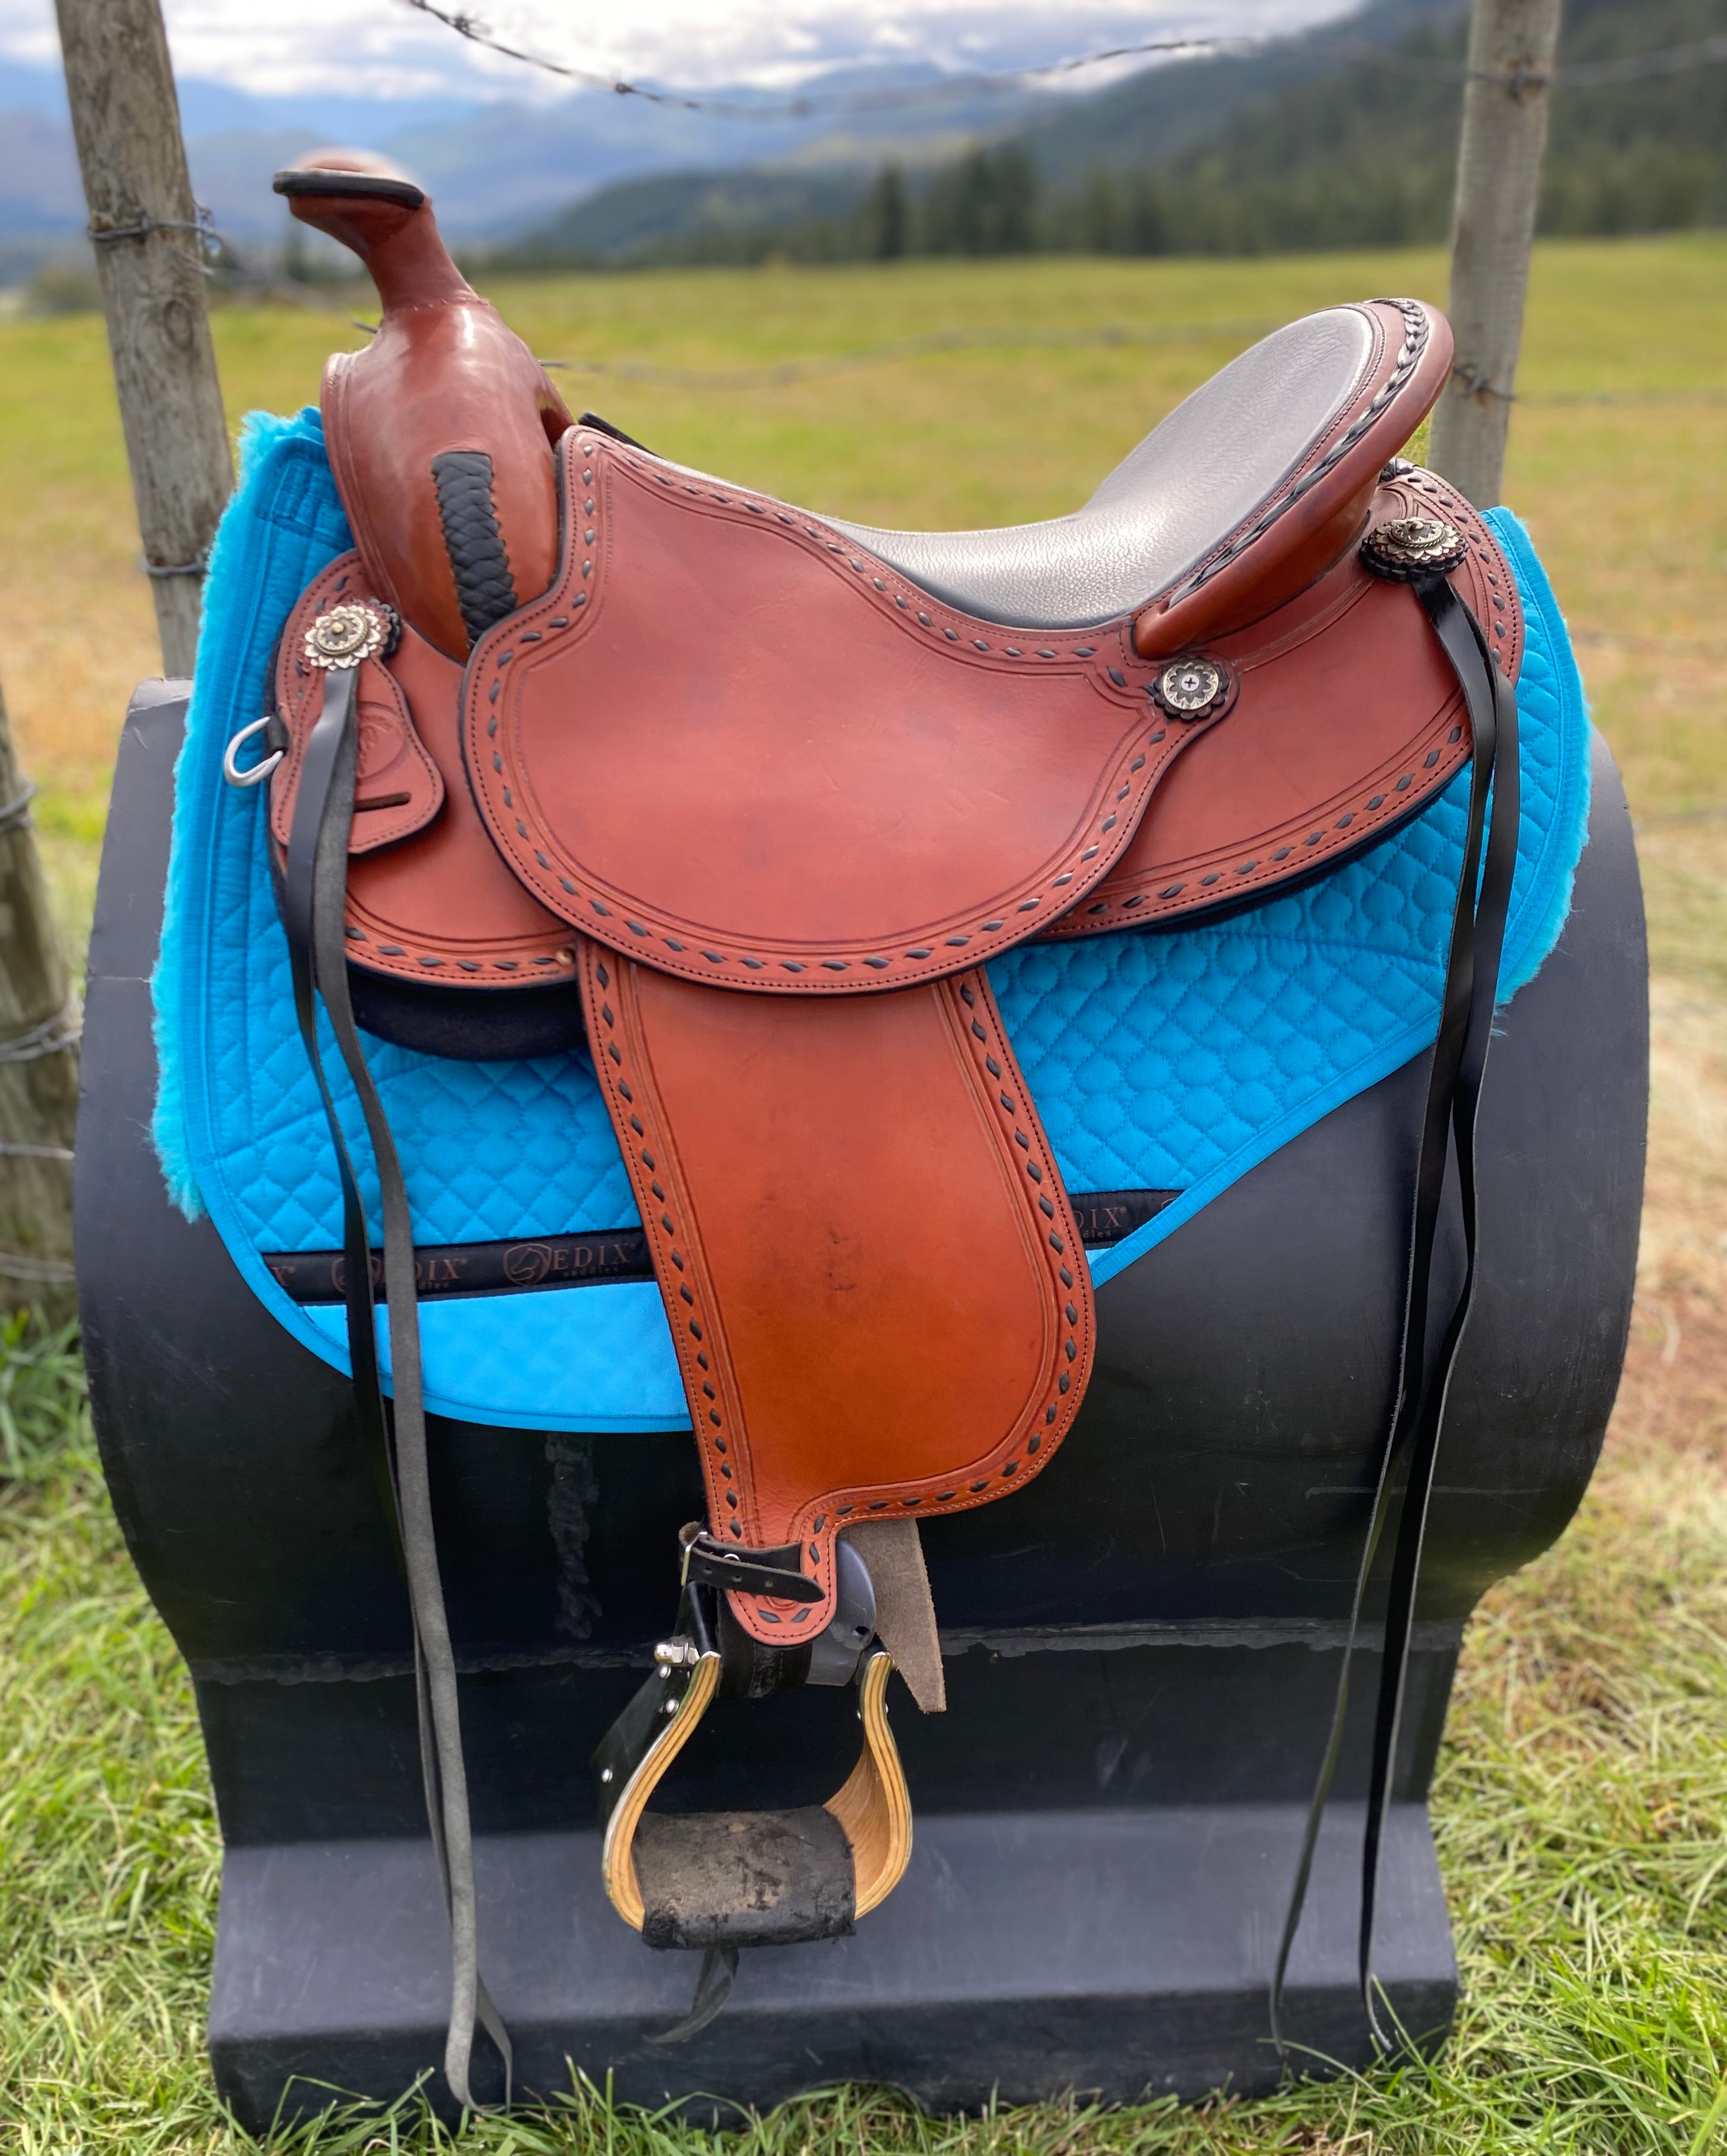 Easy Fit All-Around Saddle - Lightly Used Demo